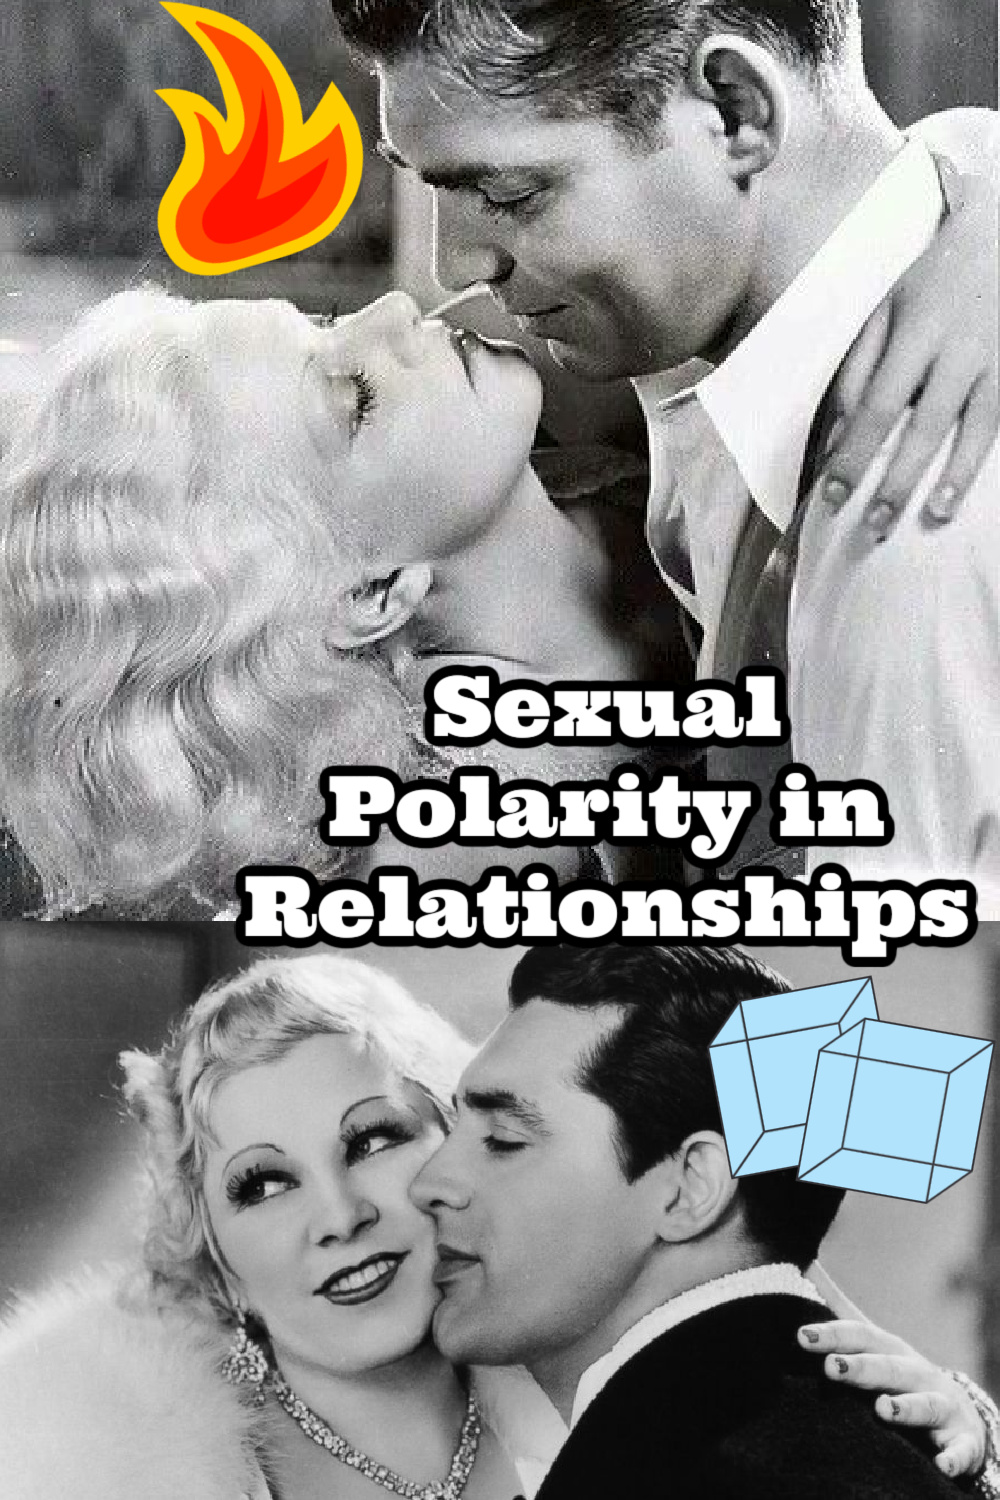 sexual polarity in relationships, sexual polarity, sexual polarity masculine feminine, law of polarity in relationships, how to create polarity in relationships, how men attract a feminine partner, how to attract a feminine woman, wounded feminine energy, wounded masculine energy in a woman, should women pursue men, dating advice for men, dating advice for women, passive men, understanding masculine and feminine energy, understanding masculine and feminine energy beginners guide, feminine and masculine energy in relationships, difference between feminine and masculine energy, divine masculine and feminine healing energy, feminine energy, feminine and masculine energy balance, feminine and masculine energy traits, feminine masculine energy, feminine energy vs masculine energy, masculine energy, masculine energy vs feminine energy, masculine vs feminine, Everyday starlet, sarah blodgett,